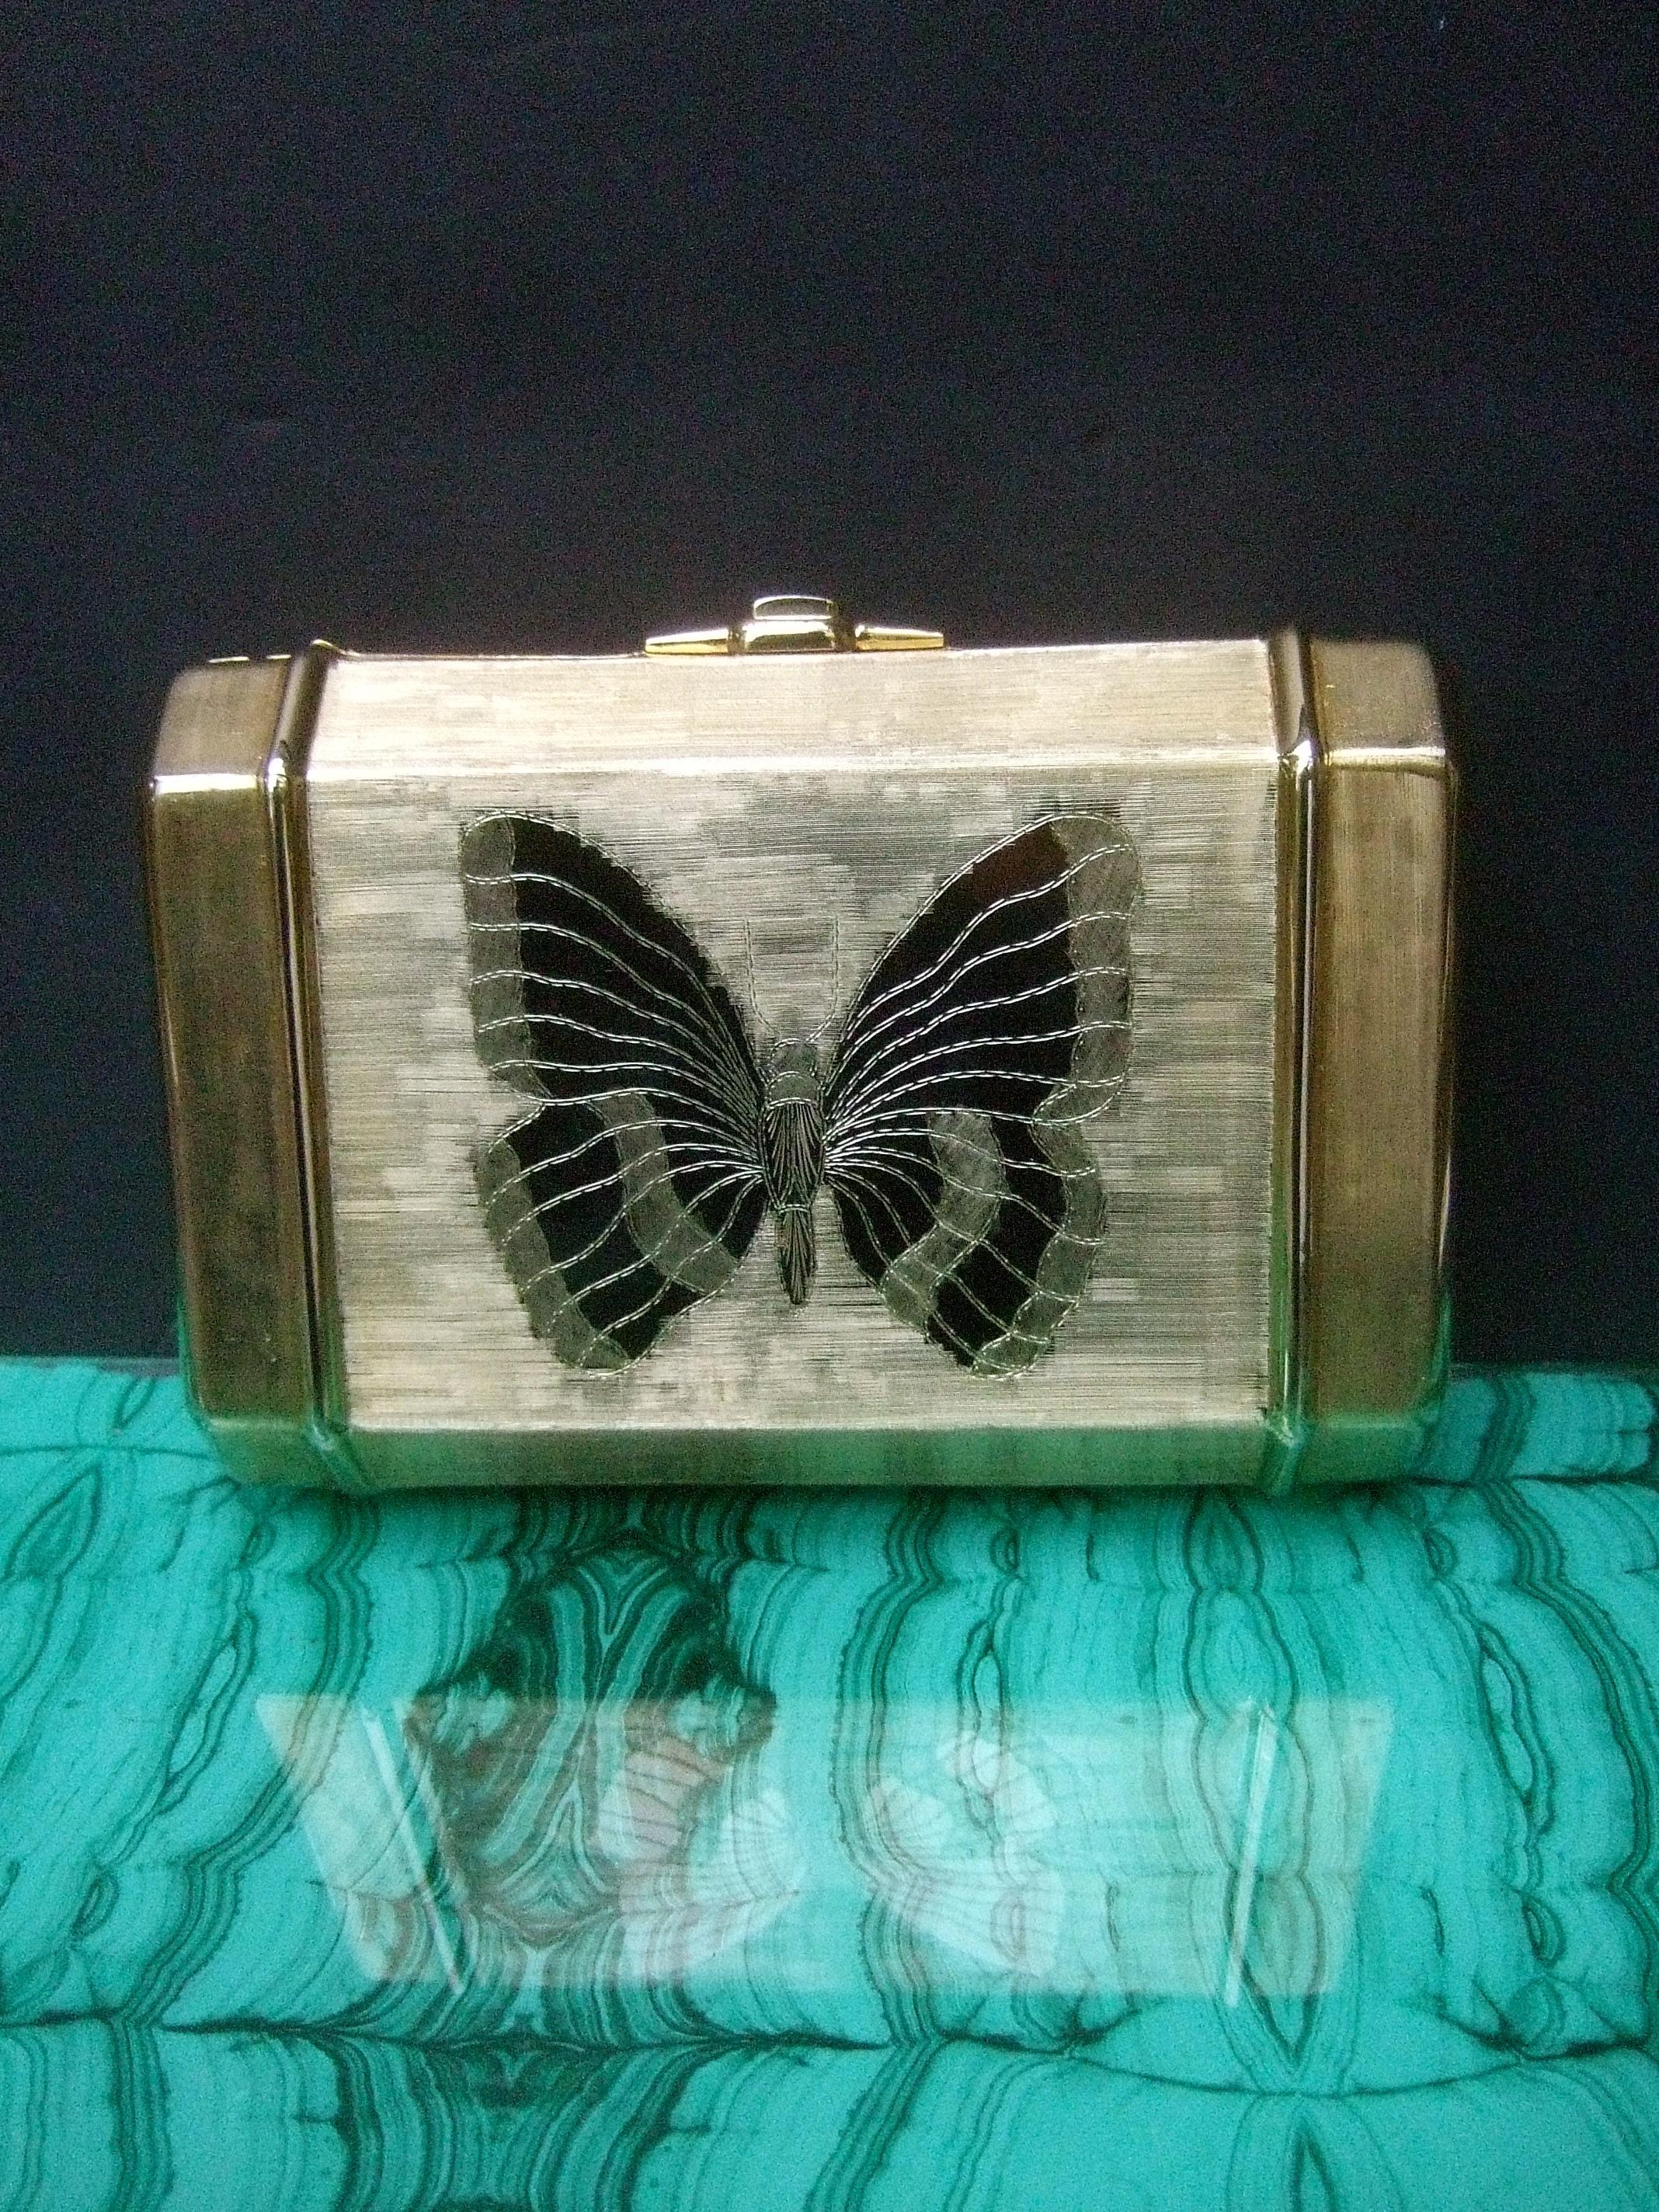 Saks Fifth Avenue Opulent gilt metal butterfly minaudiere' c 1970s
The elegant evening bag is adorned with an etched butterfly motif on the front
The stylized butterfly is shiny polished gilt metal; in contrast the sides and backside are